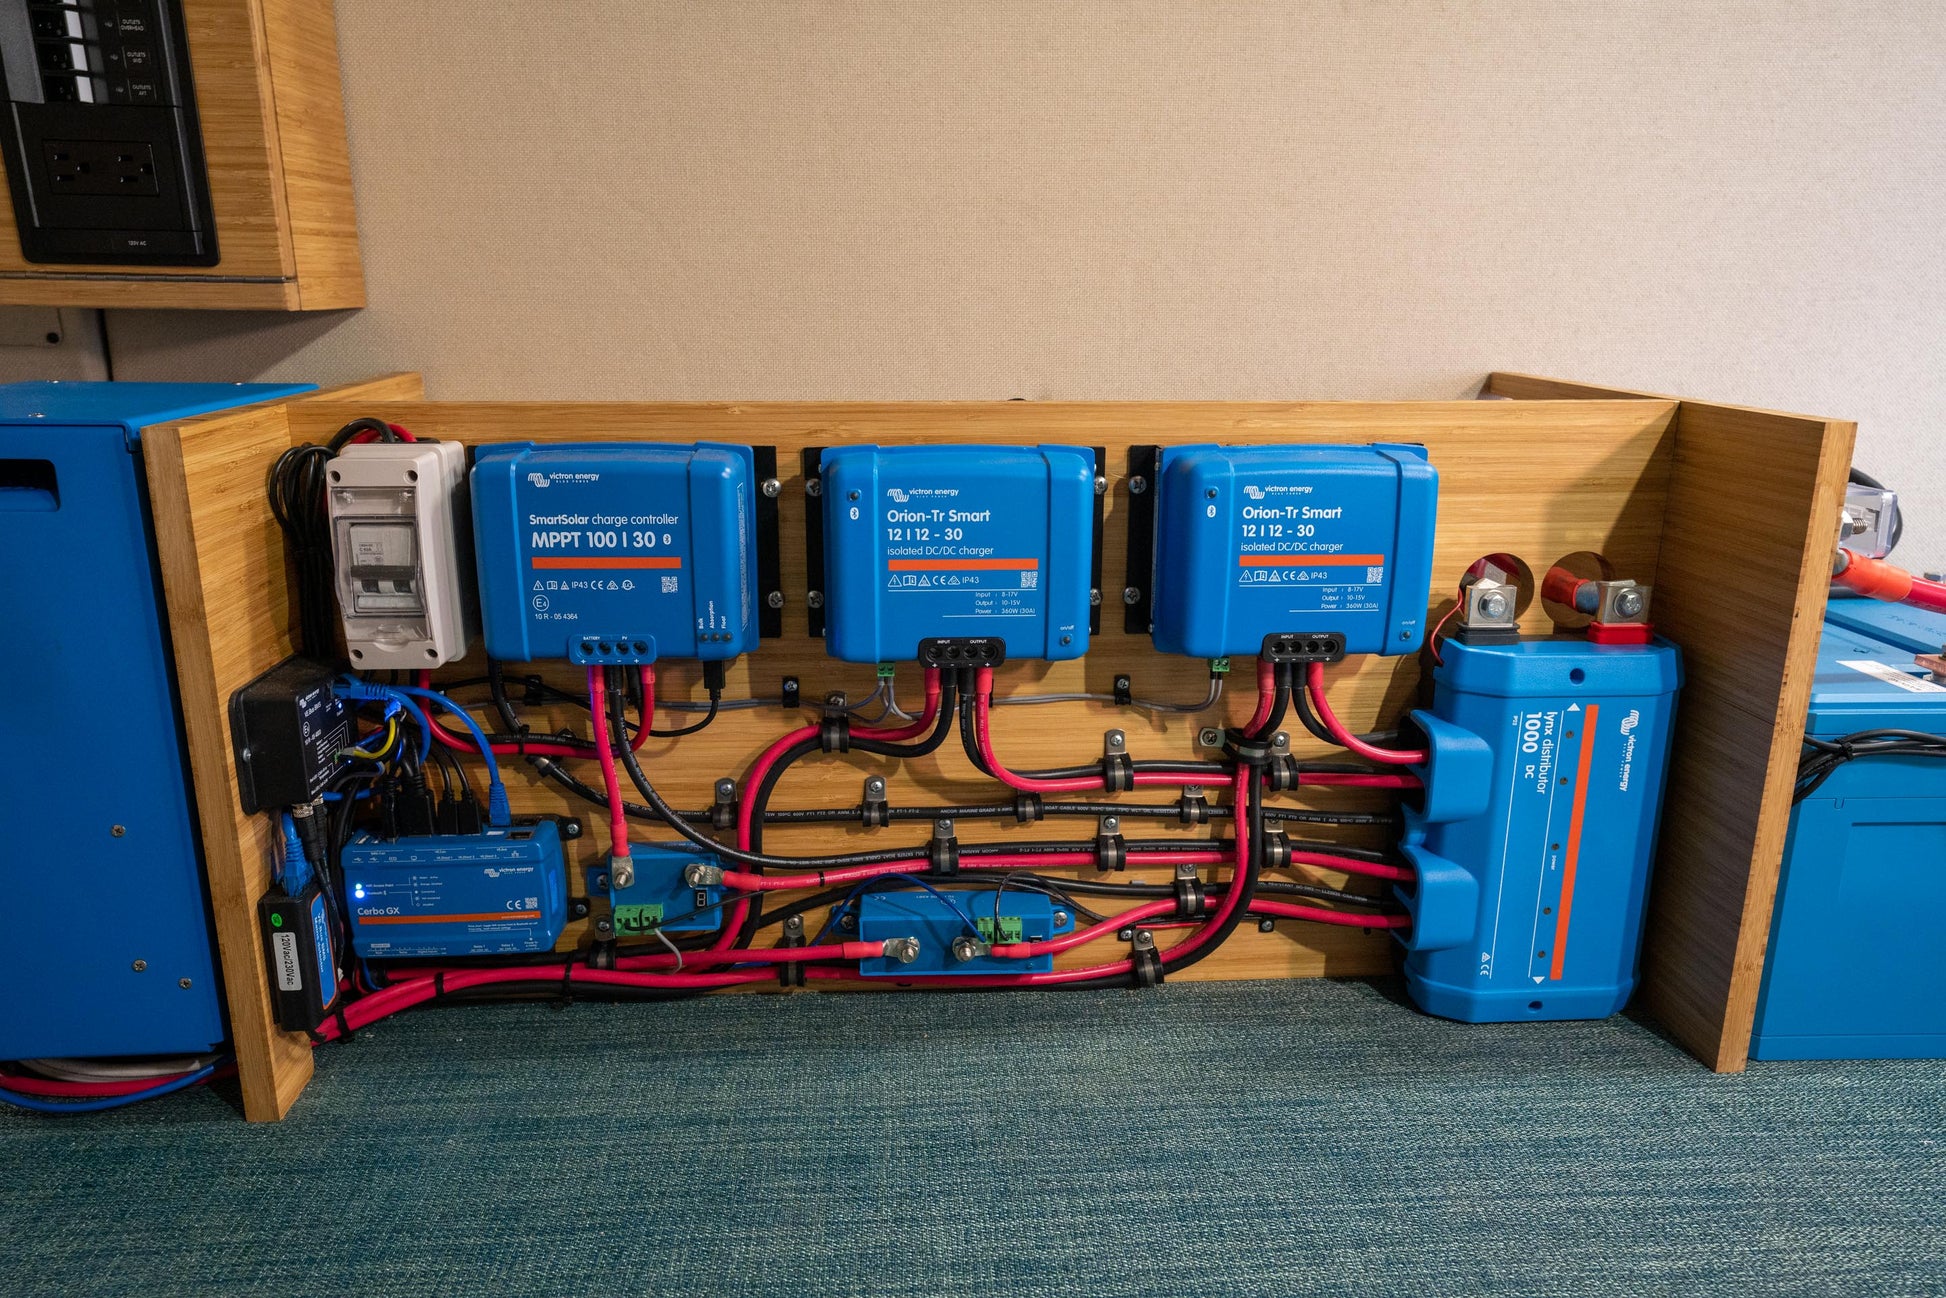 Wiring a Victron MPPT 100/30 Solar Charge Controller, Van Electrics